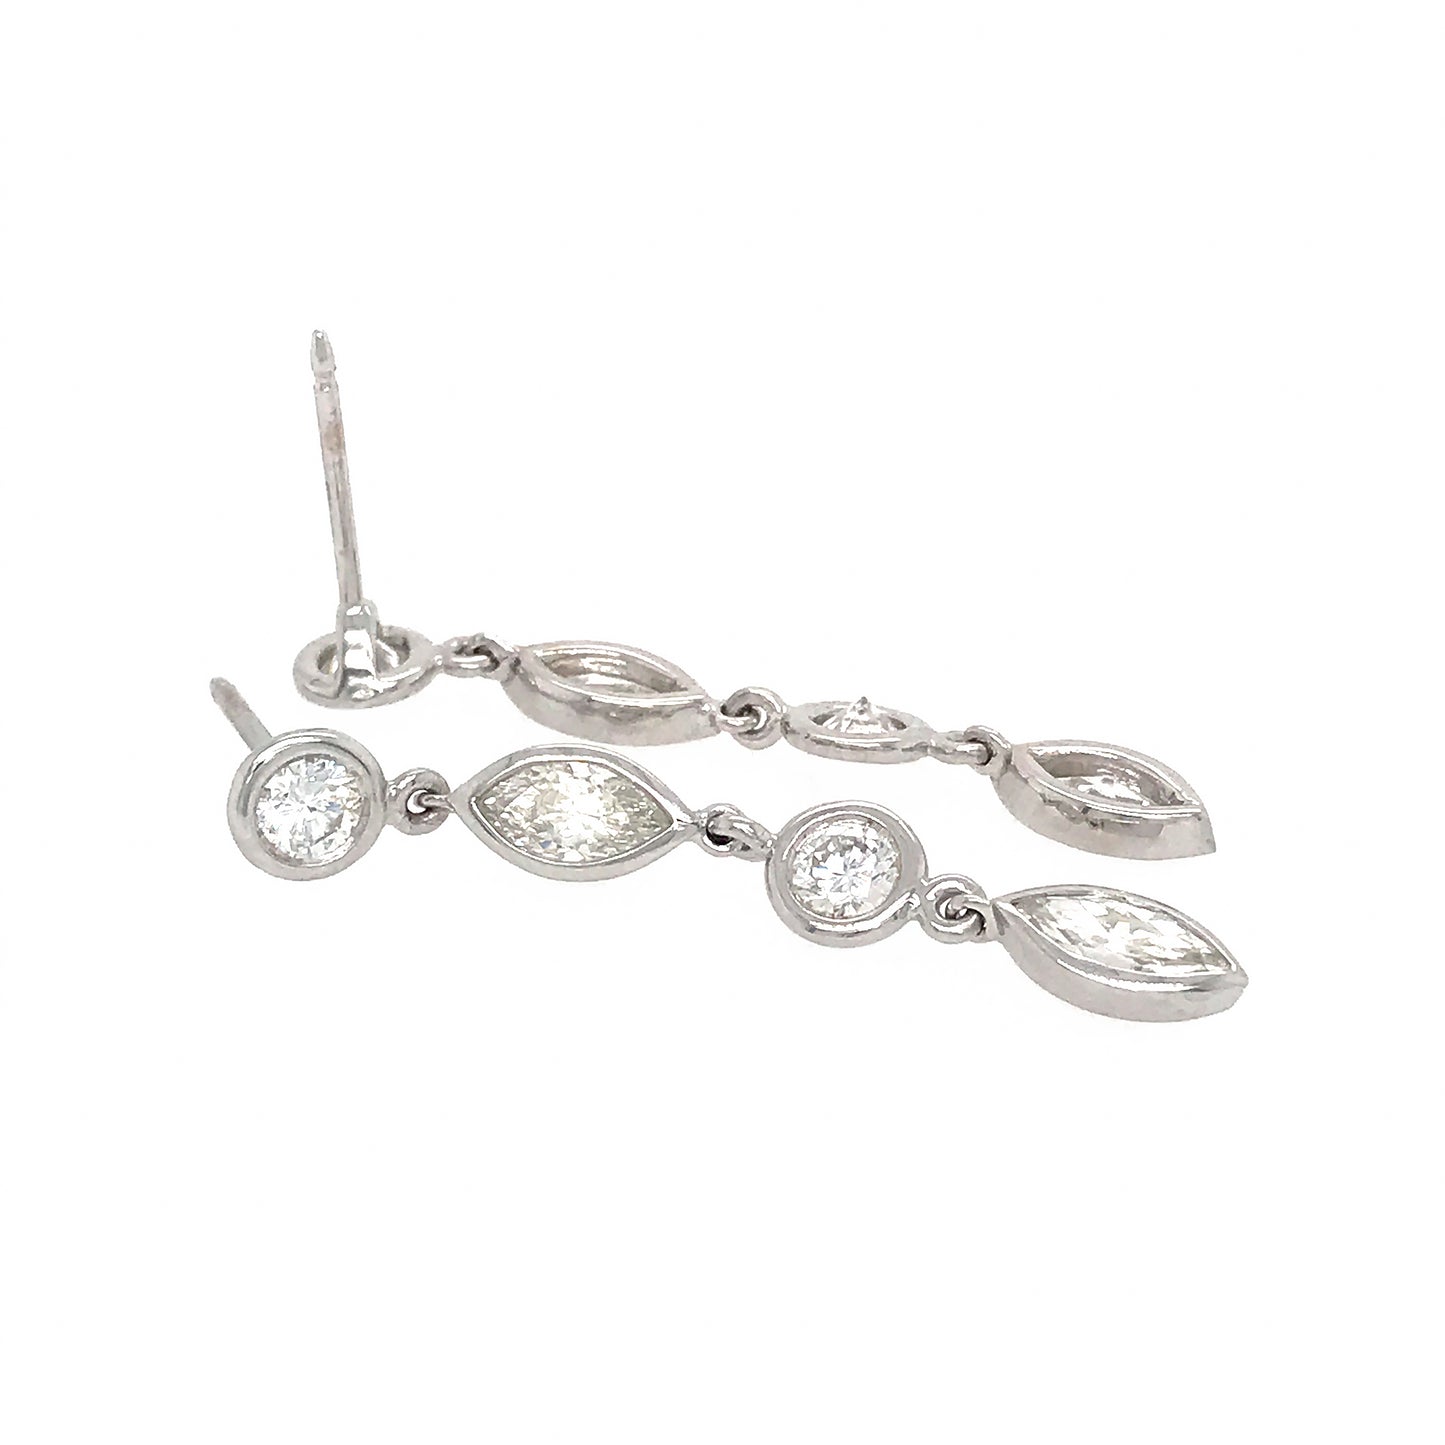 FAB DROPS 14k White Gold Round and Marquise Diamond Drop Earrings